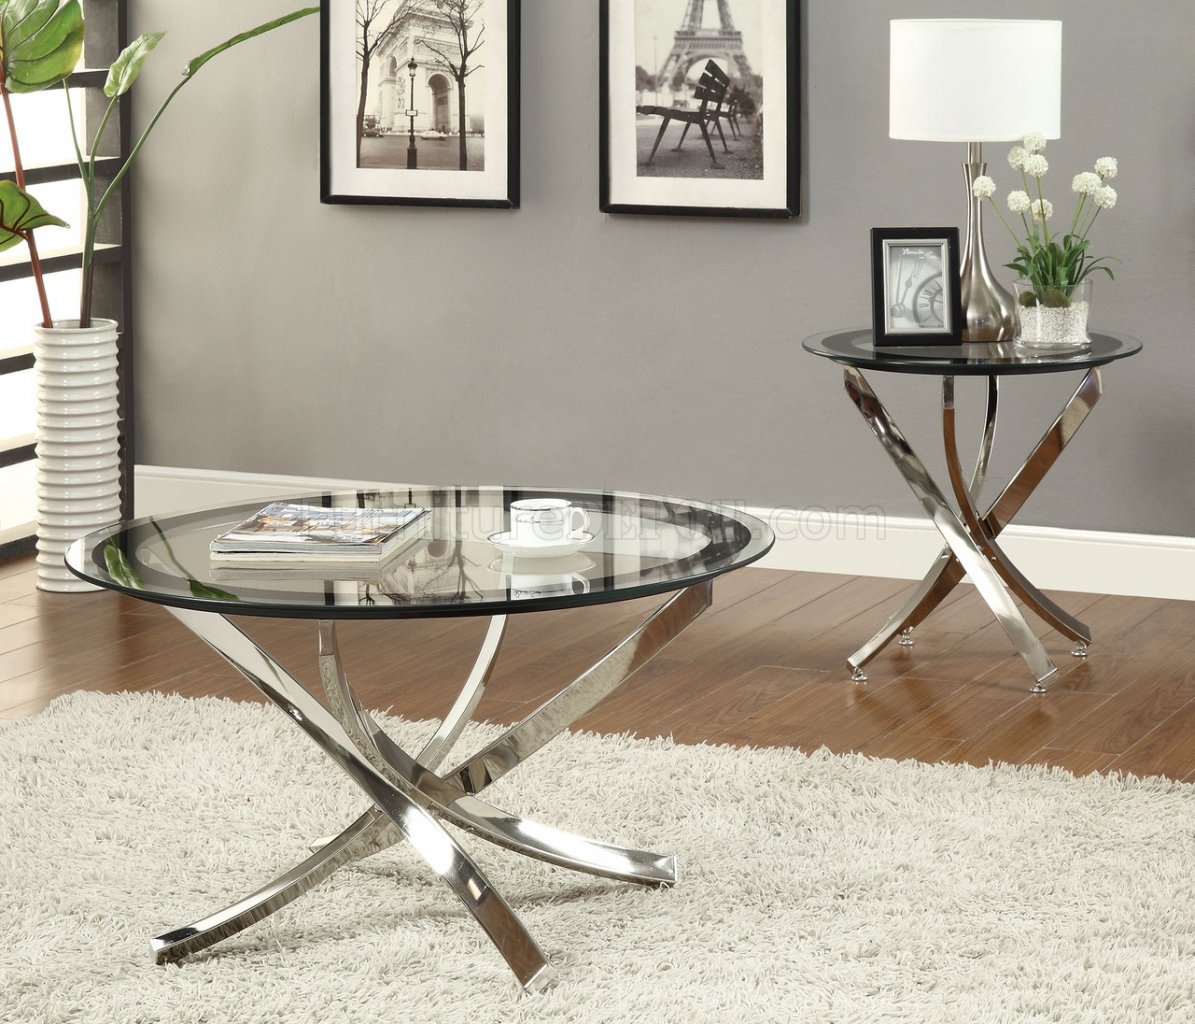 702588 Coffee Table 3pc Set By Coaster W Glass Top